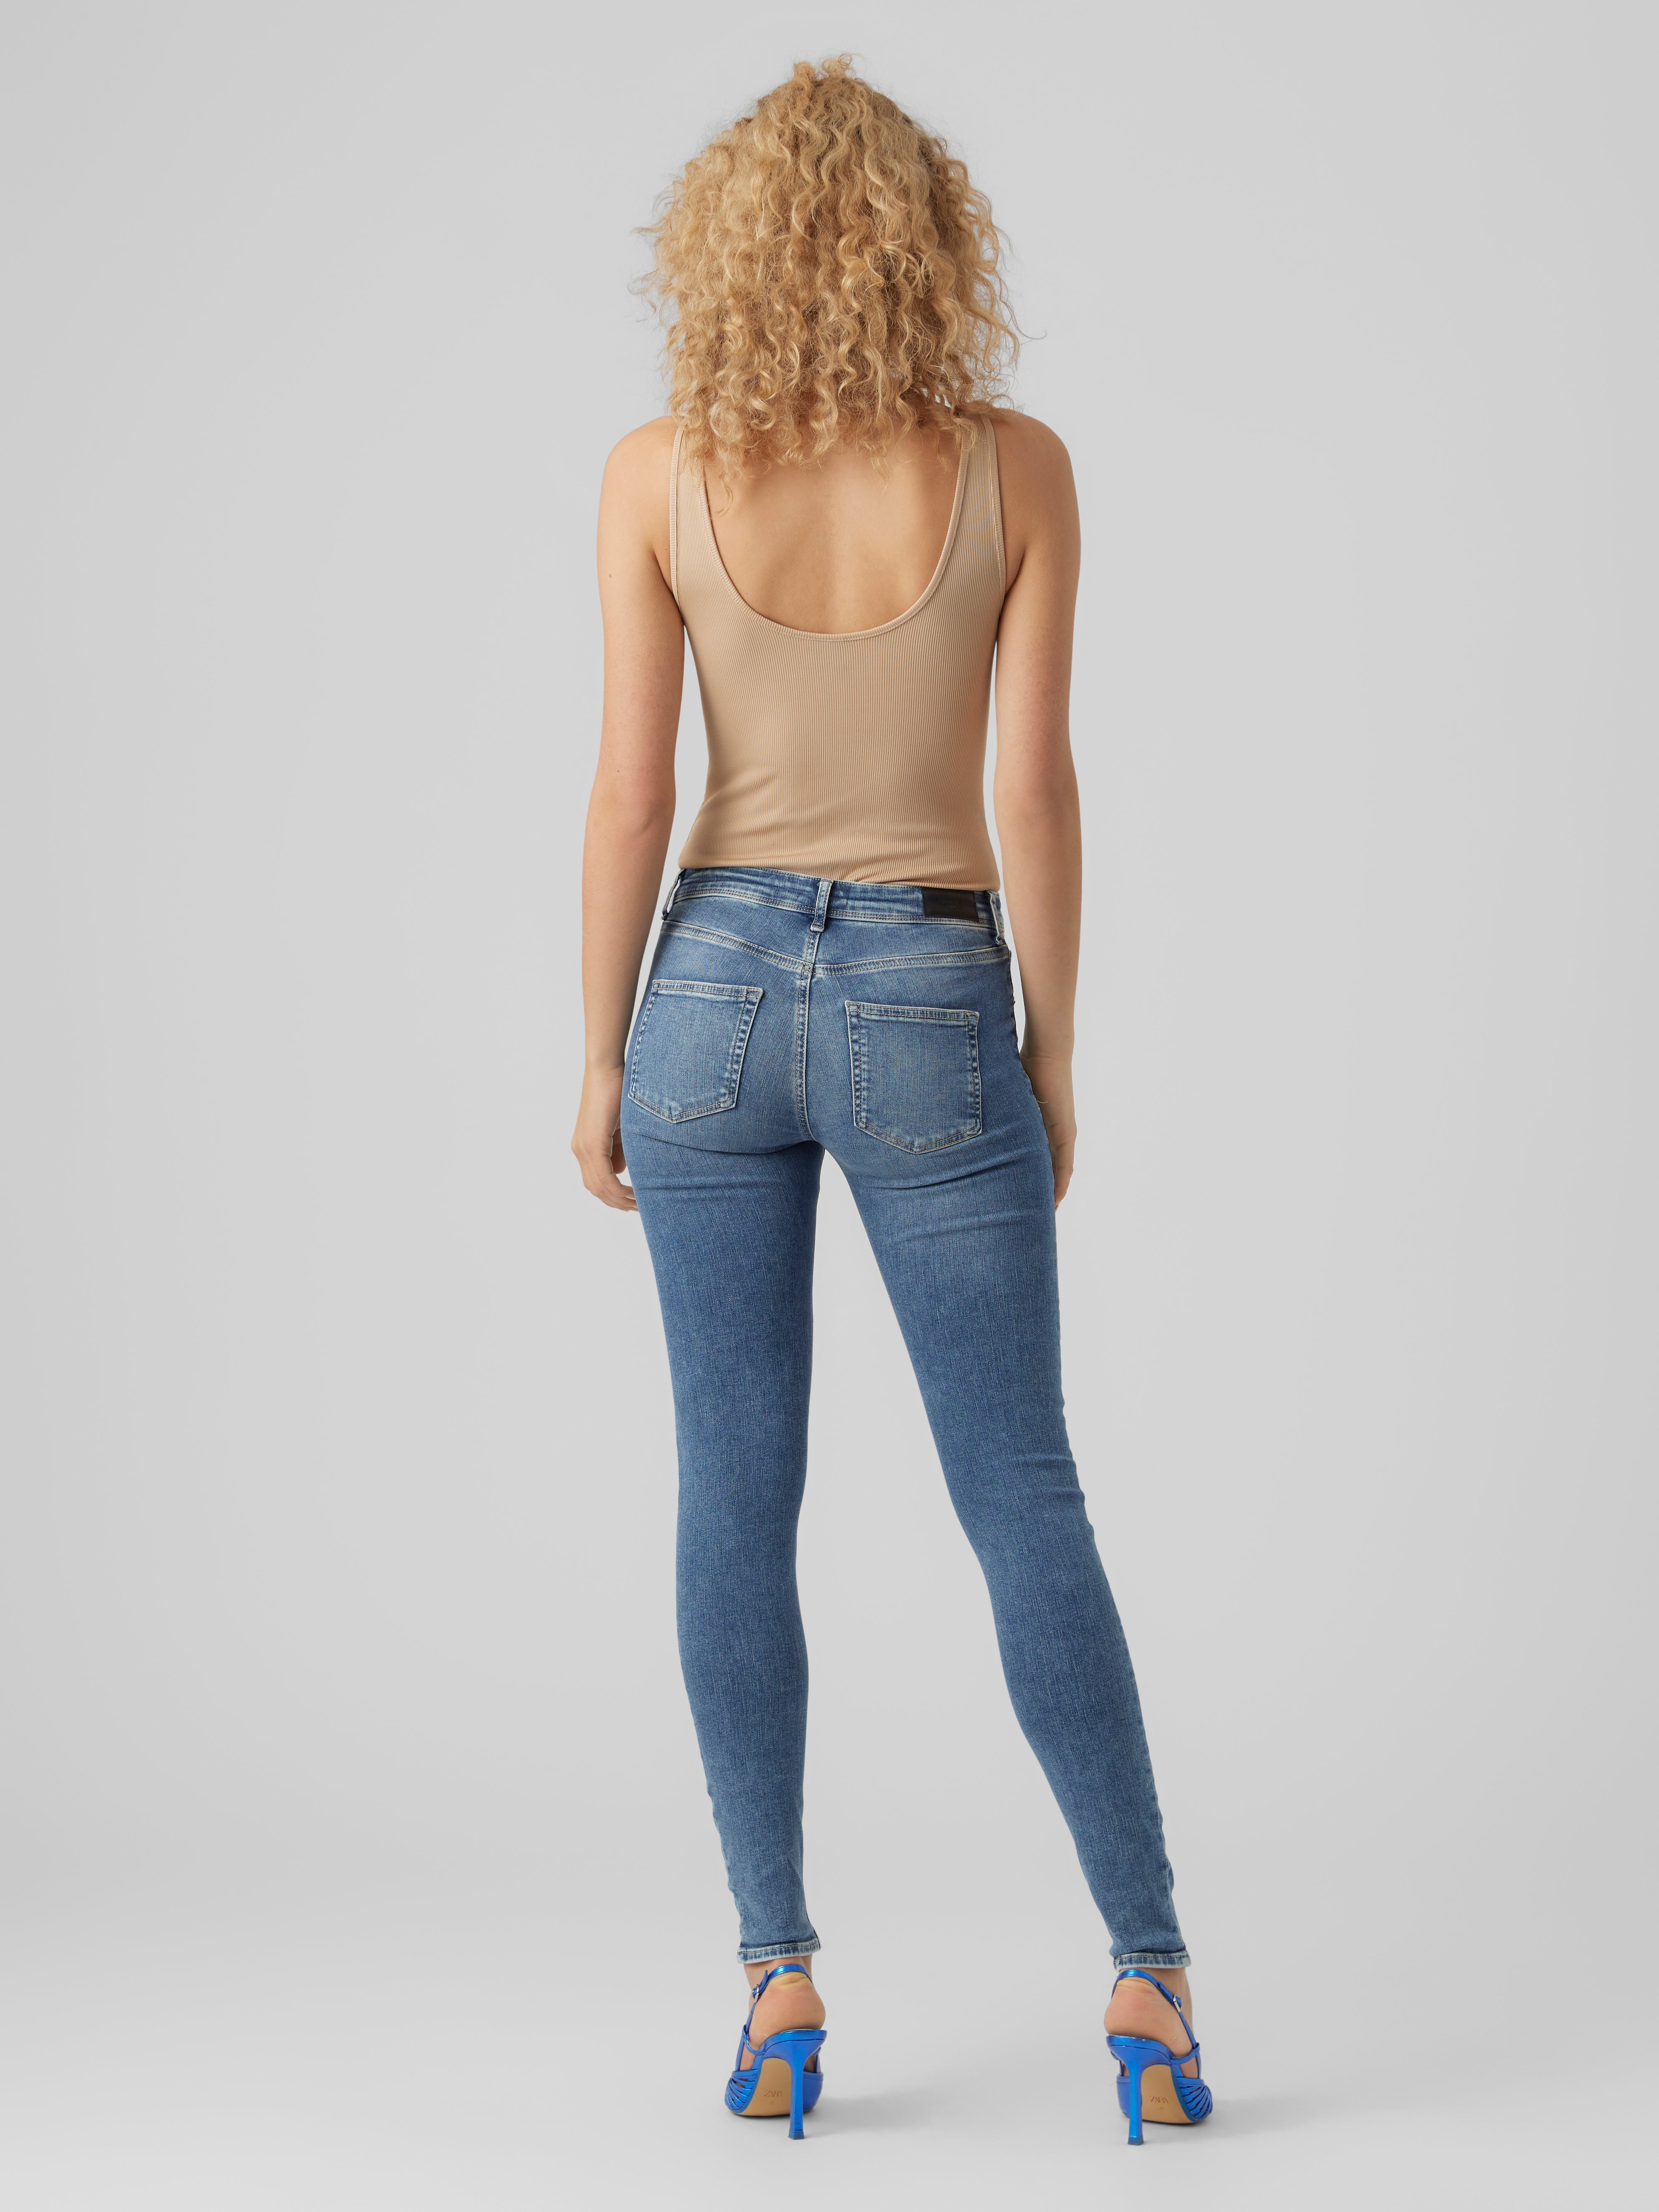 wijs taxi eb Slim Fit Mid rise Jeans with 25% discount! | Vero Moda®